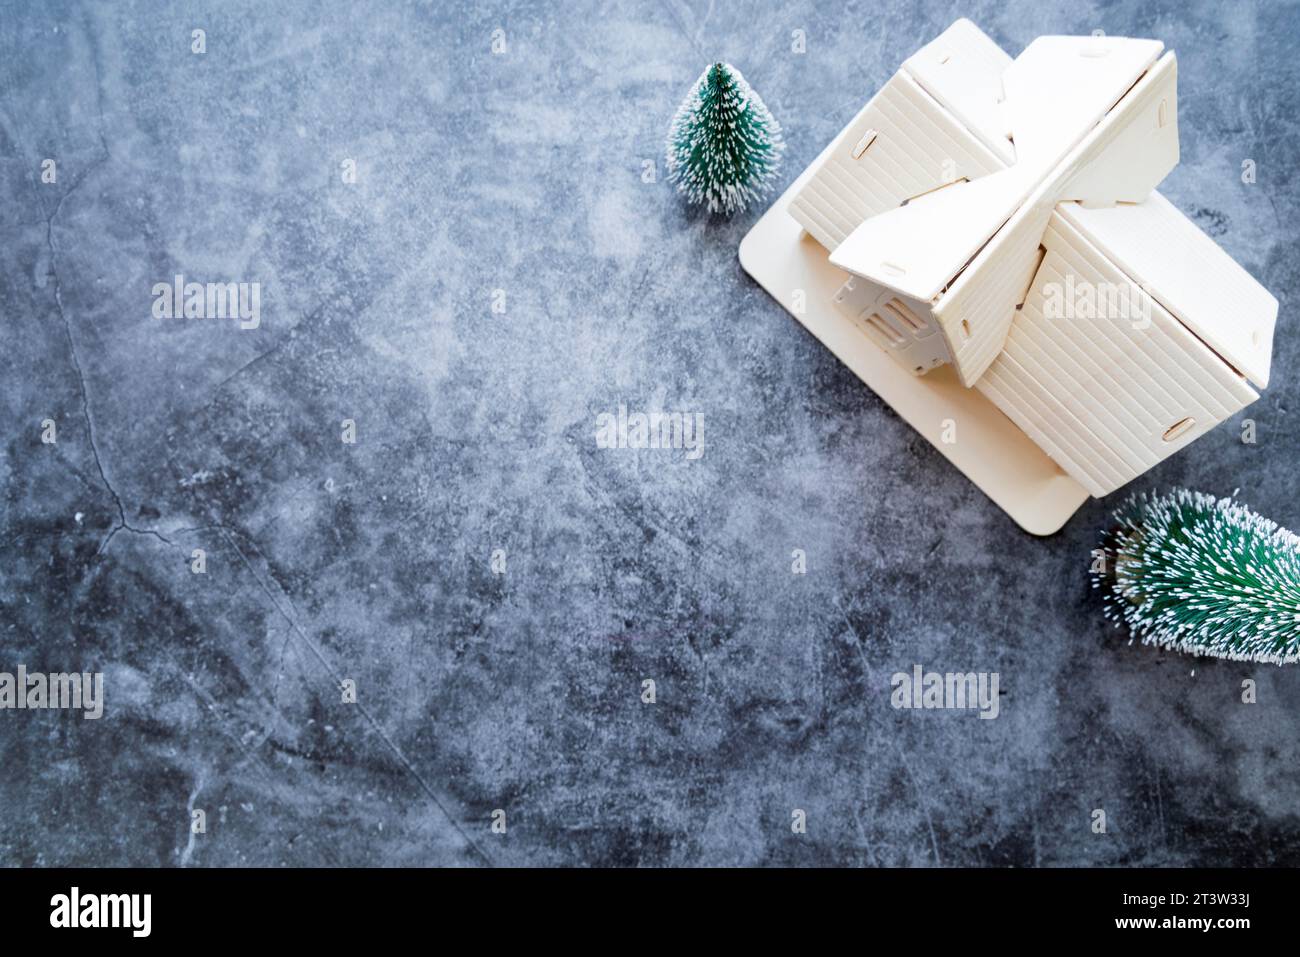 Overhead view house model with christmas tree weathered concrete background Stock Photo